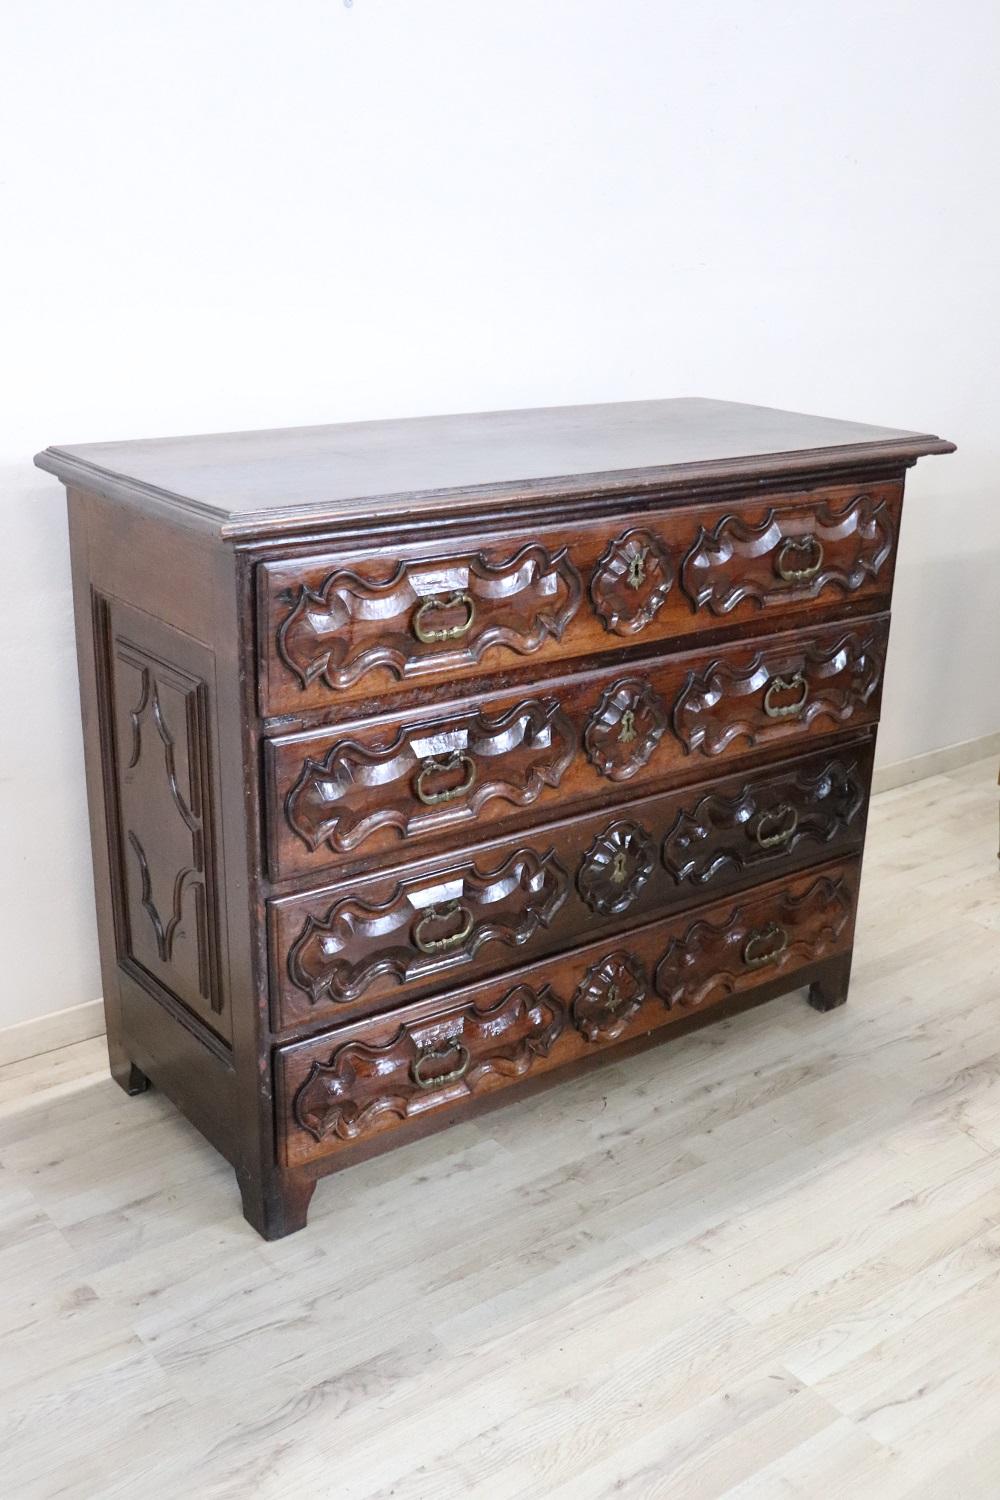 Hand-Carved 17th Century Italian Louis XIV Carved Walnut Antique Commode or Chest of Drawers For Sale